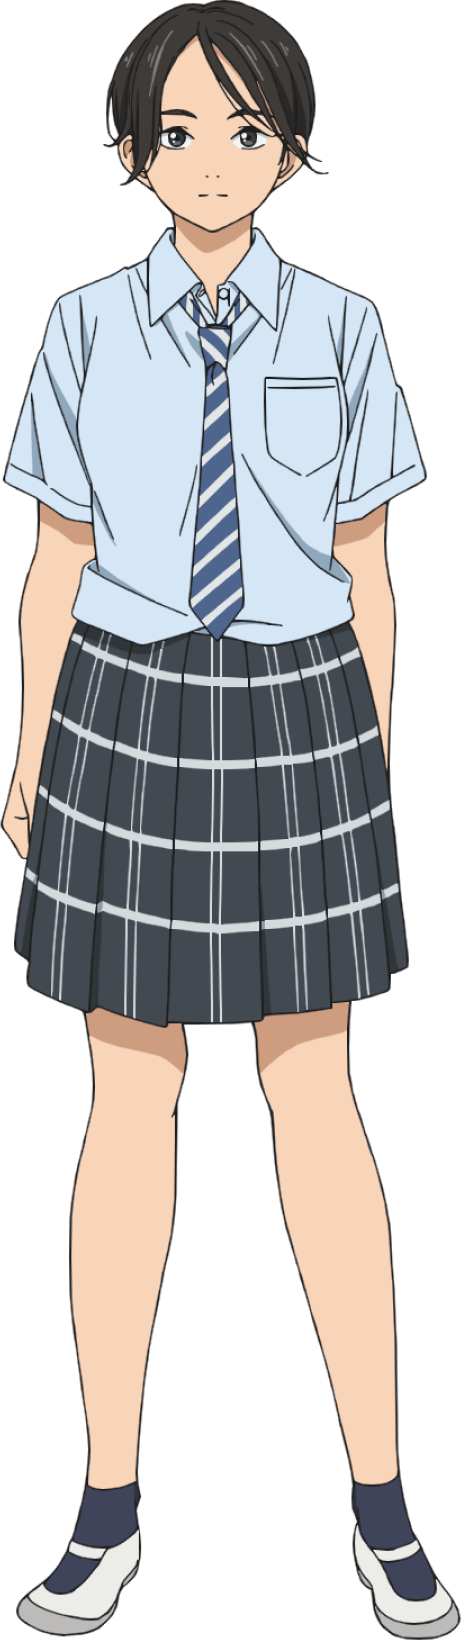 Insomniacs After School - Anime  Insomniacs After School Wiki